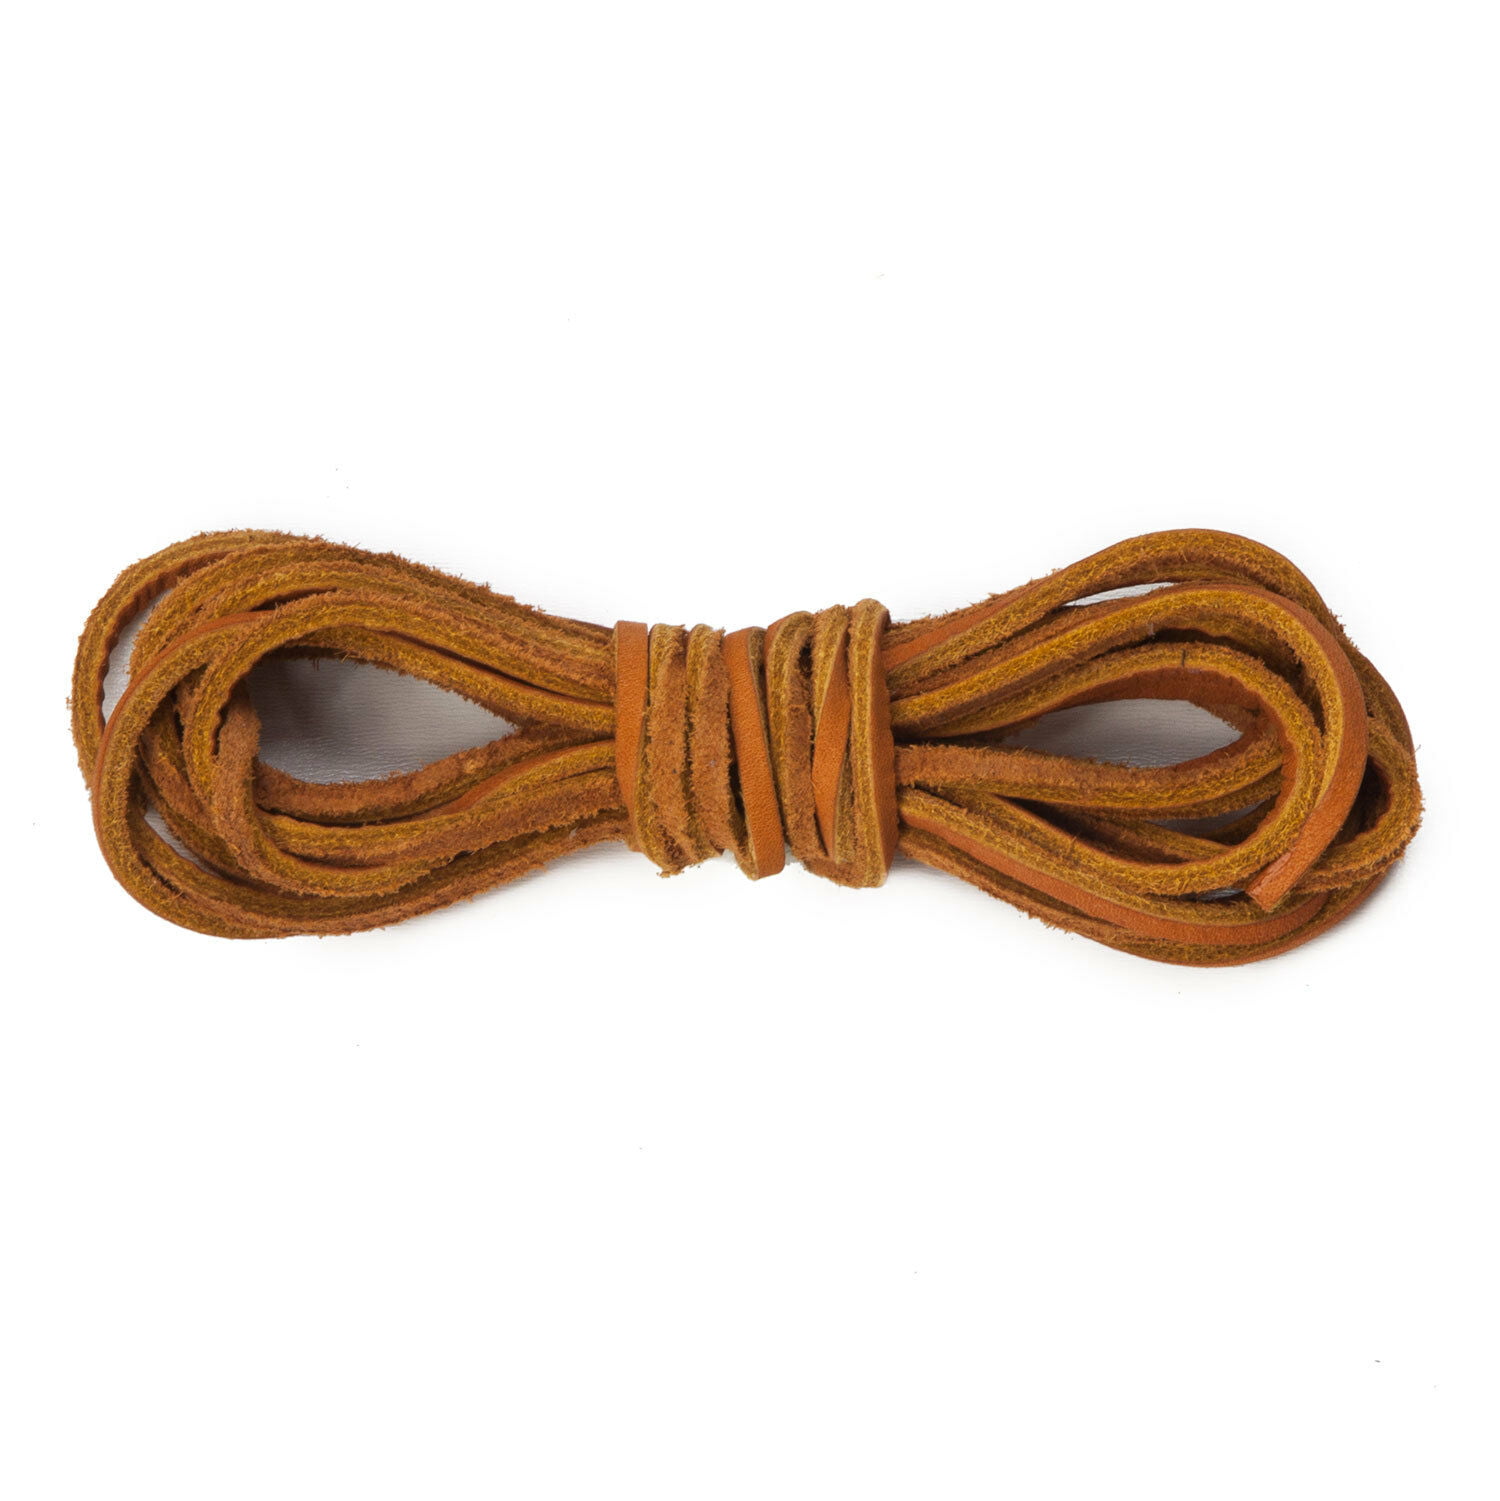 72 inches MADE IN USA Leather Boot Shoe Laces Hiking or Work in All colors 2 